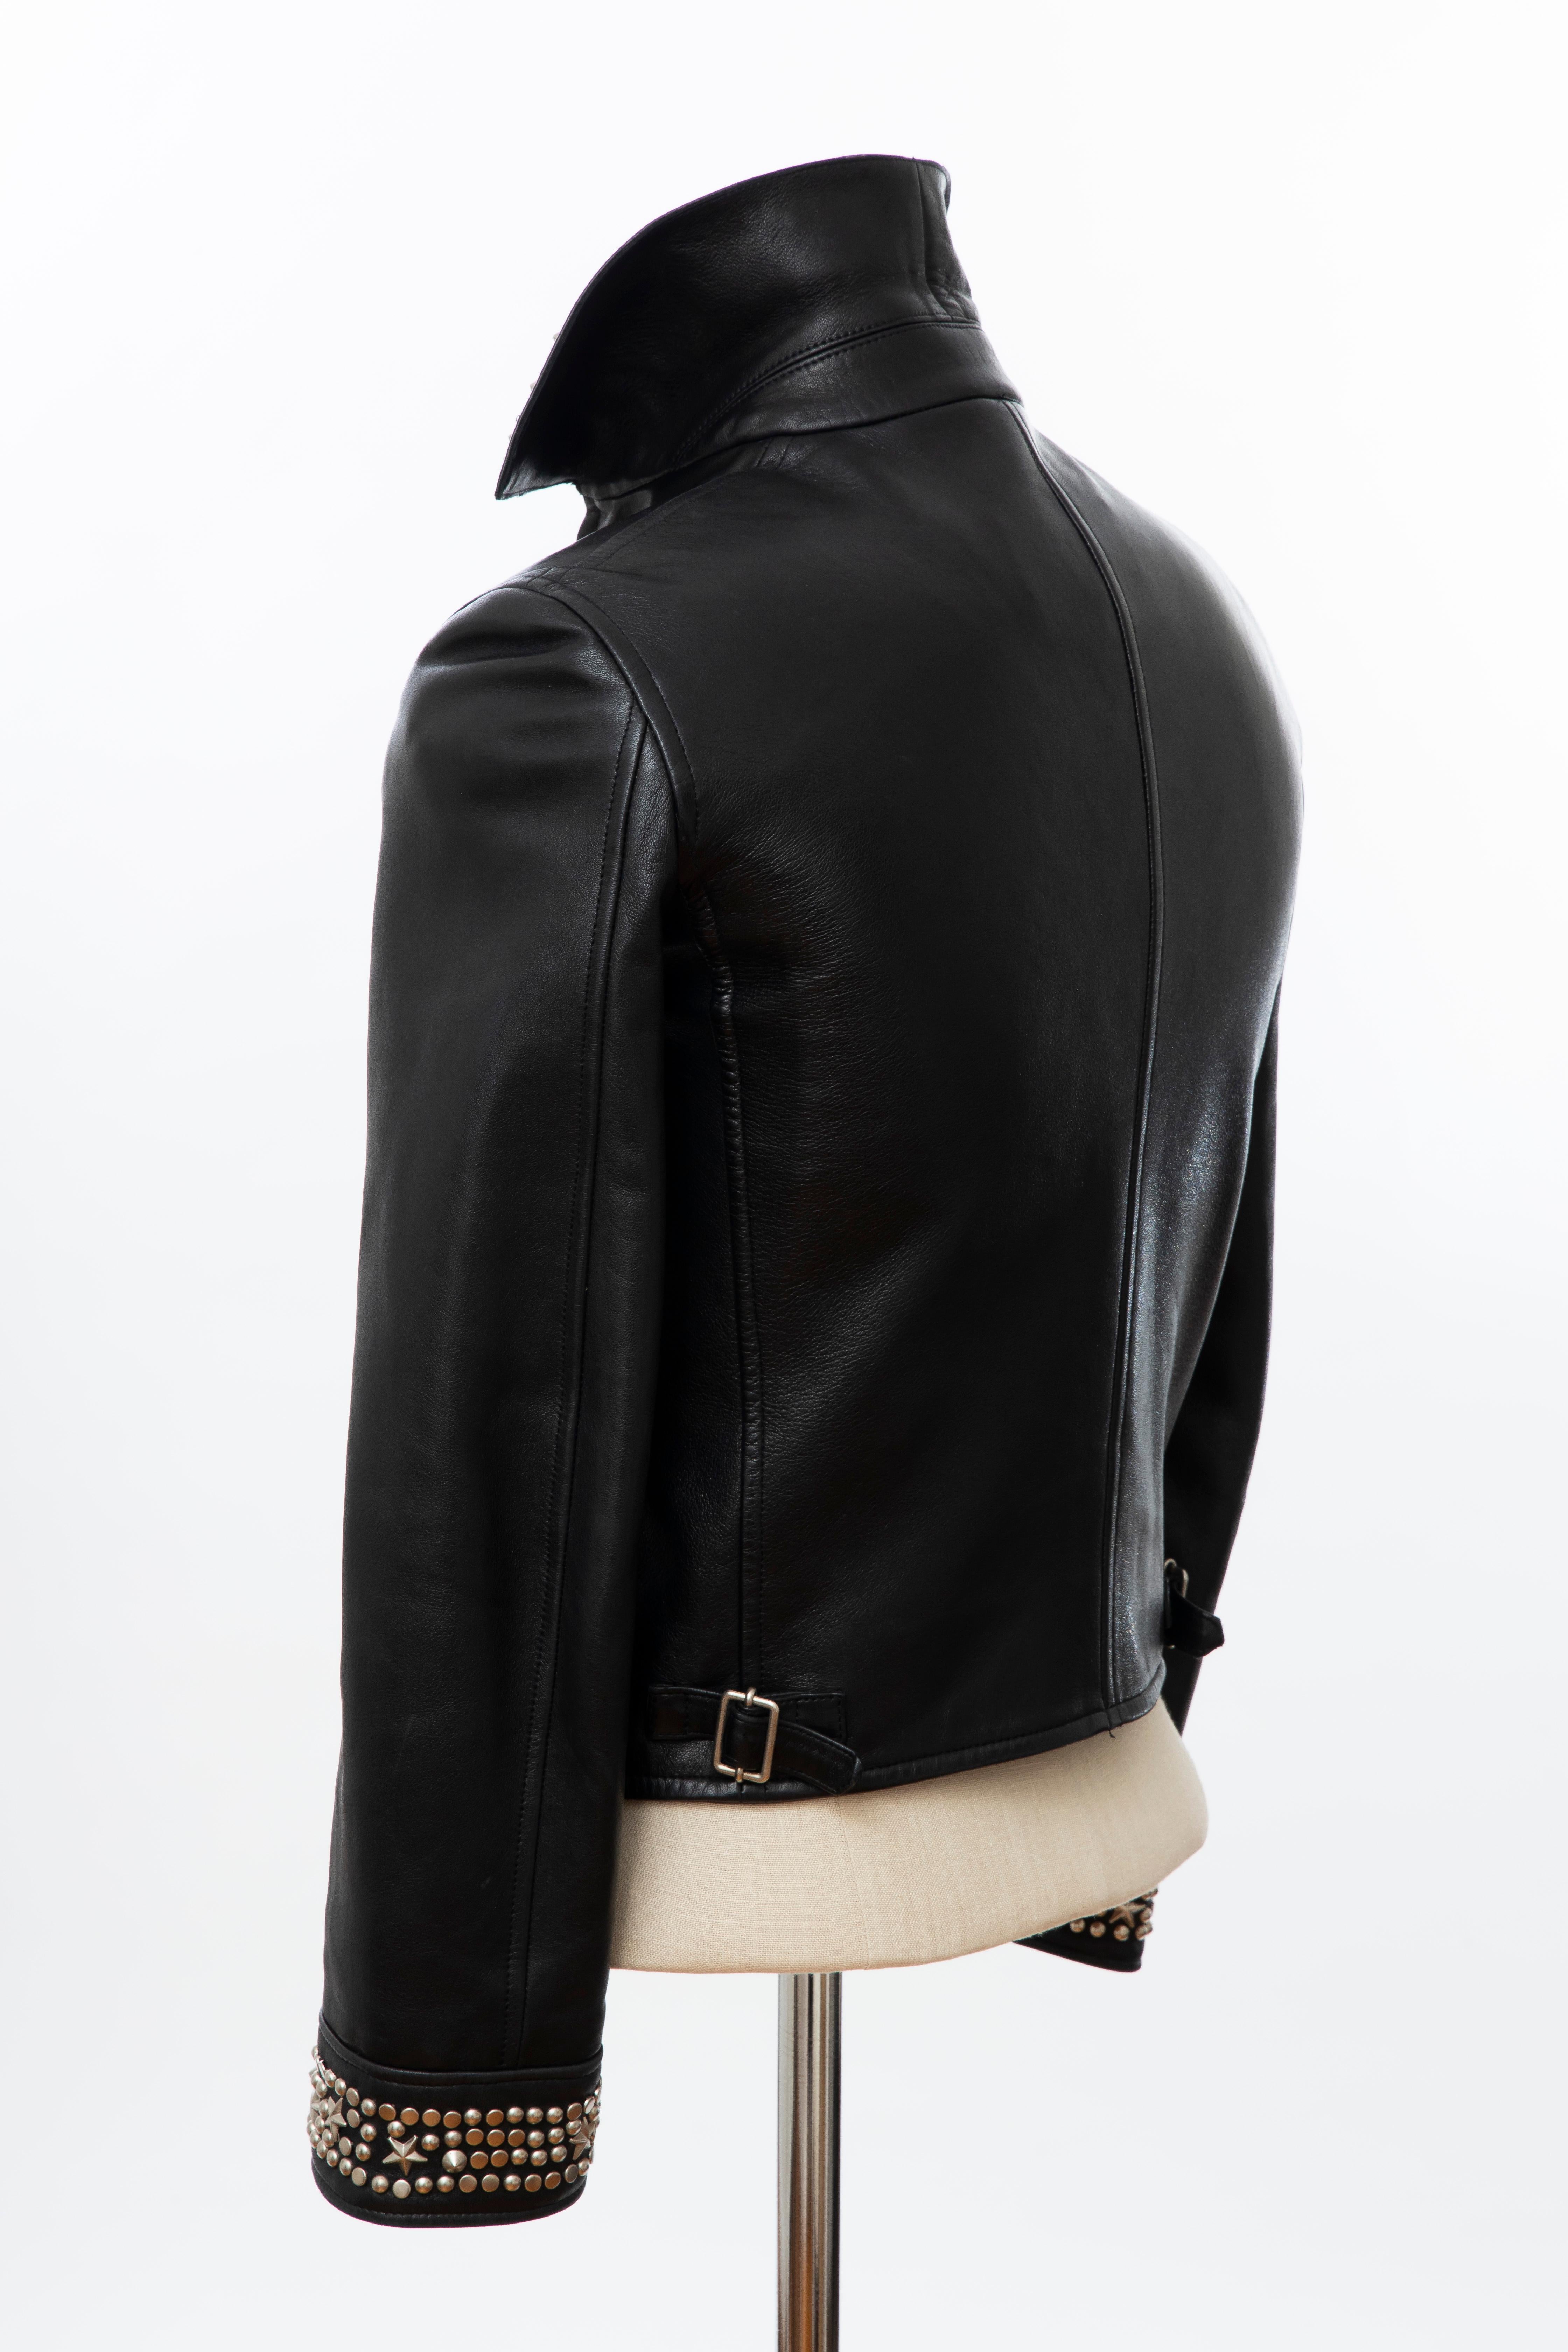 Gianni Versace Black Leather Jacket Pewter Stud Collar & Cuffs,  Circa: 1990's For Sale 3